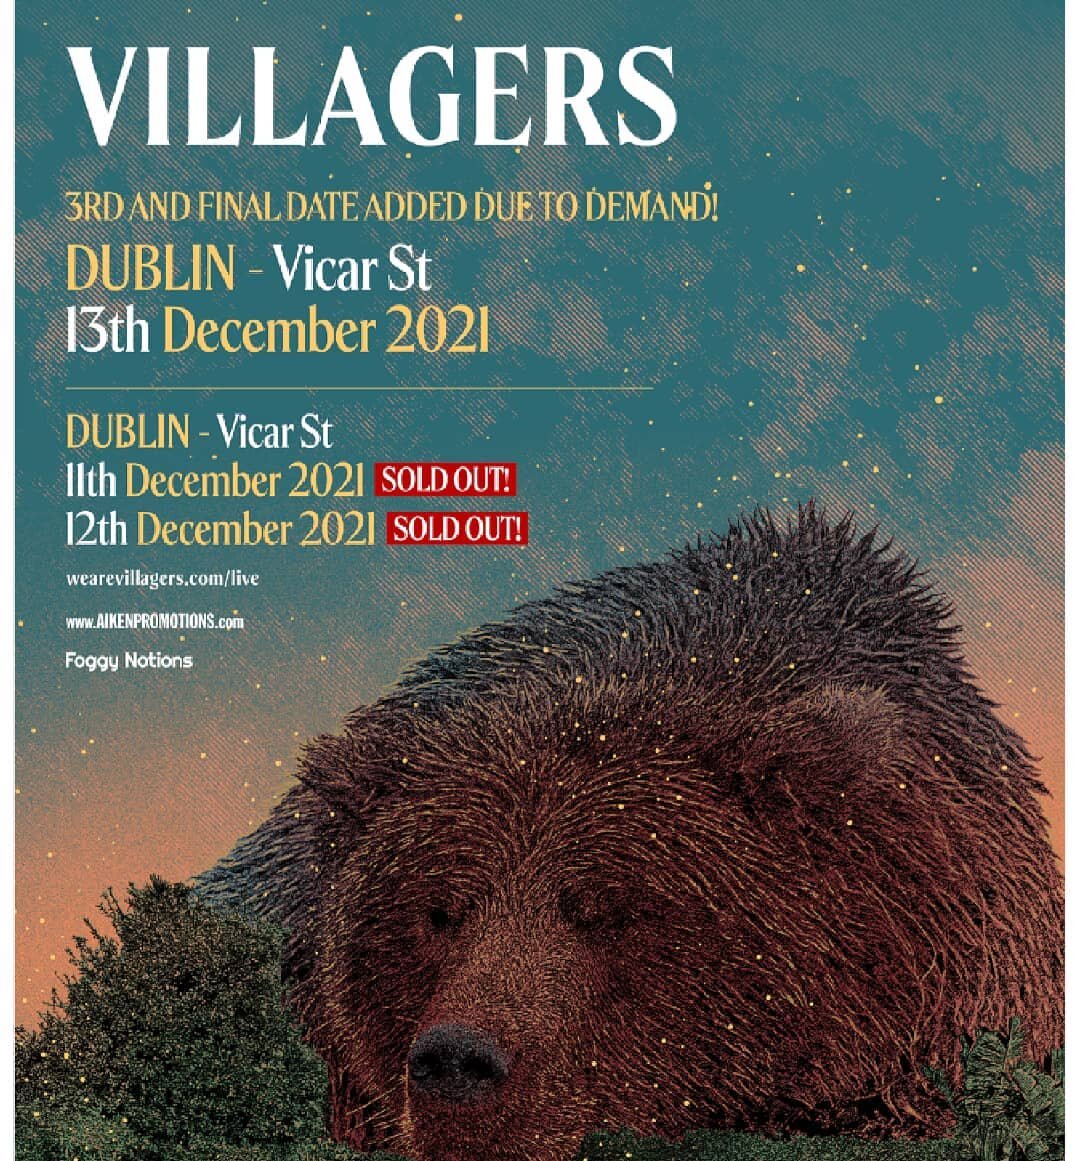 Villagers have announced a 3rd show at Dublin's Vicar Street on 13th December 2021.  Tickets on sale from 9am Fri 21 May at @tmie